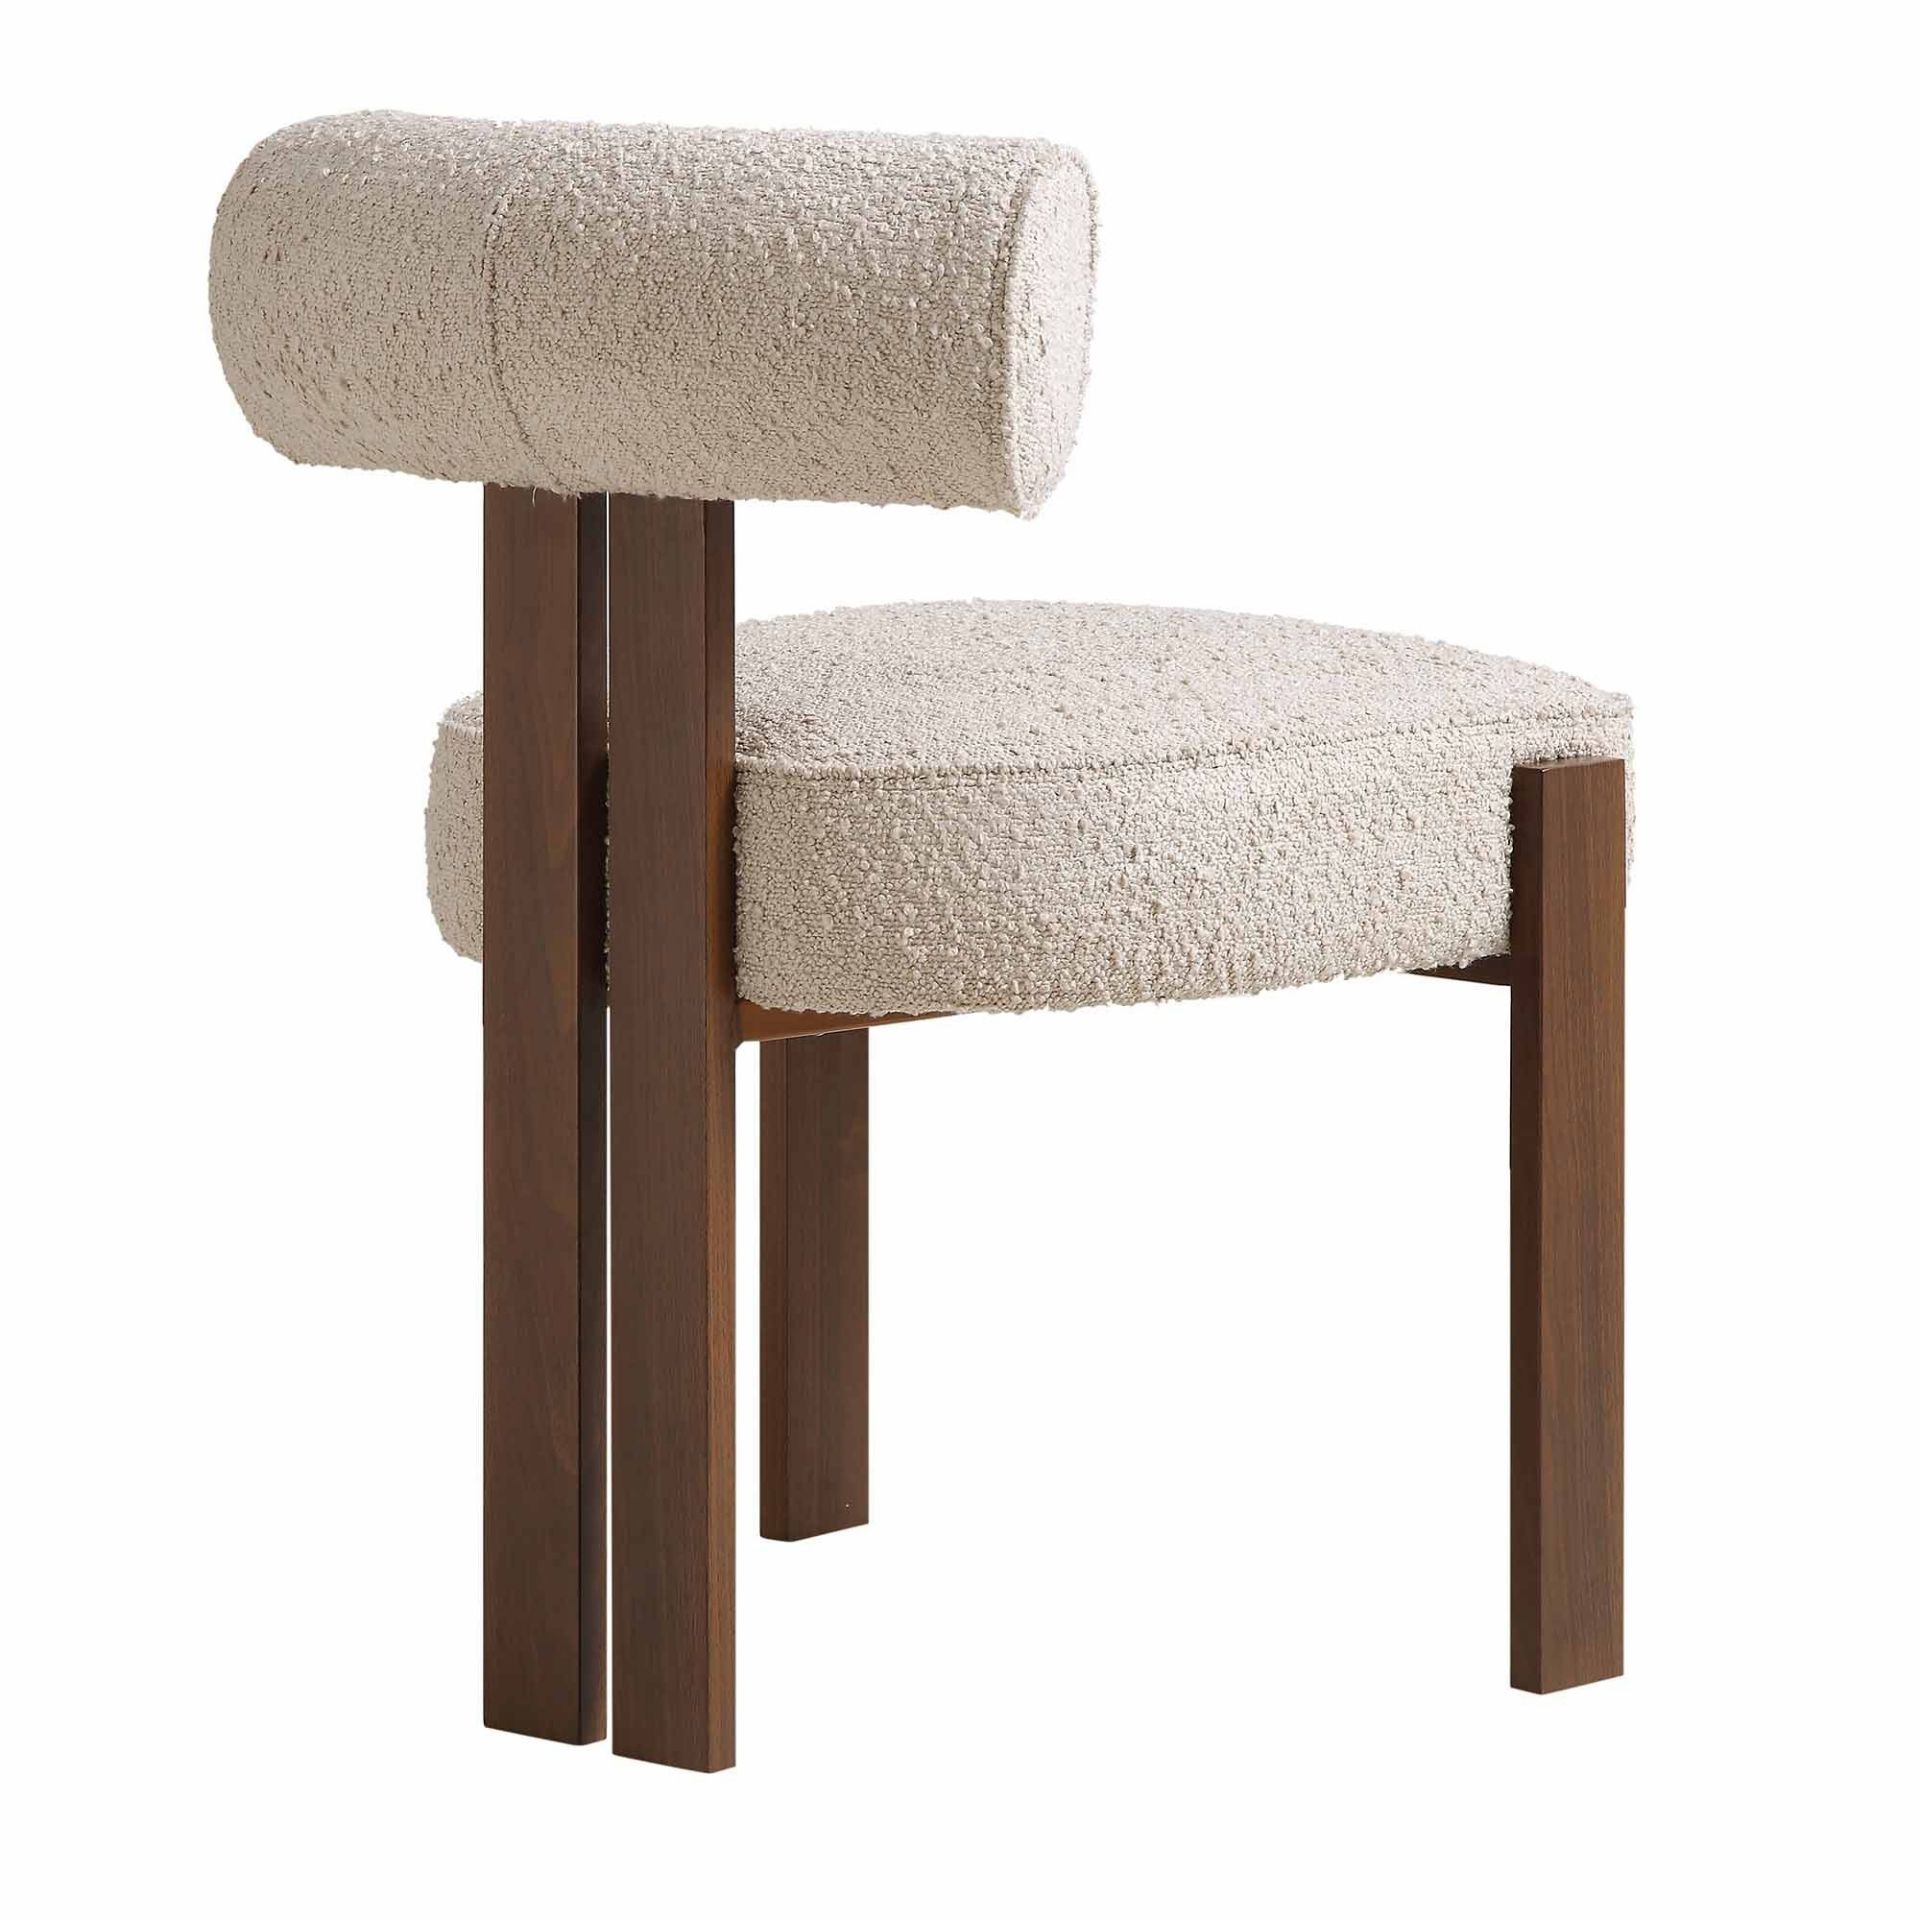 Ophelia Taupe Boucle Dining Chair. -R14. RRP £199.99. Combining chic taupe boucle upholstery and - Bild 2 aus 2